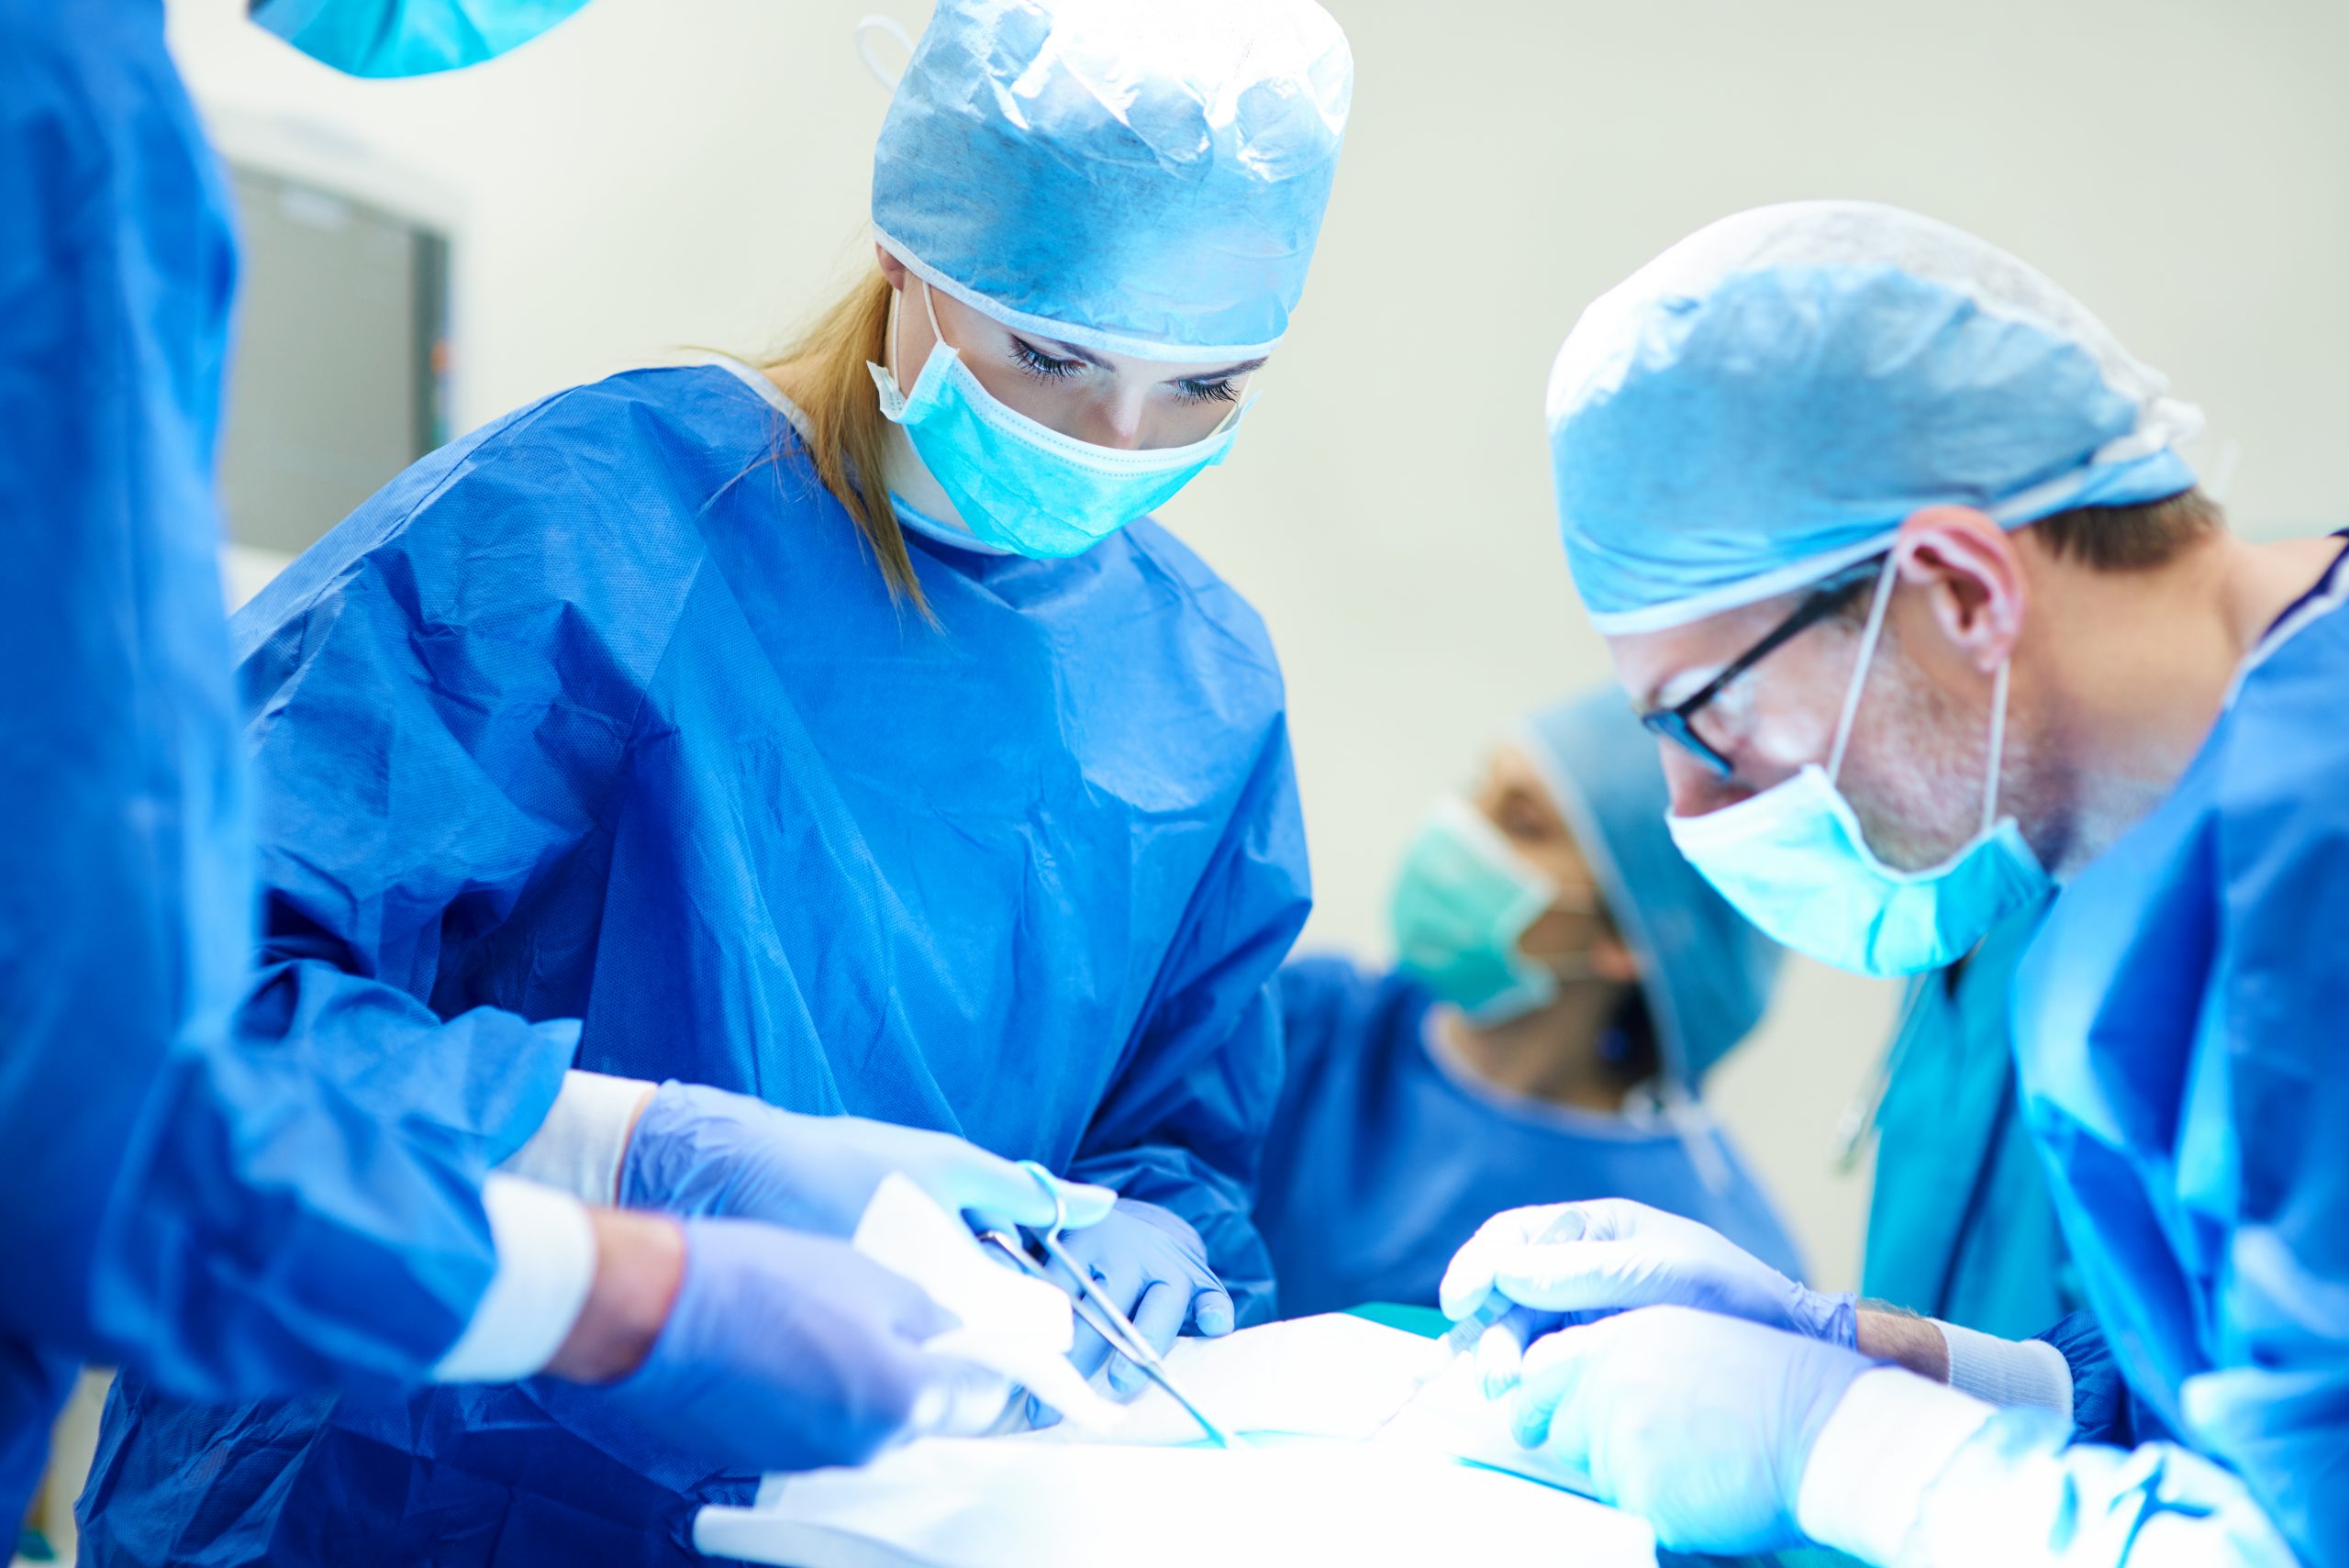 Organ transplants are covered by critical illness insurance